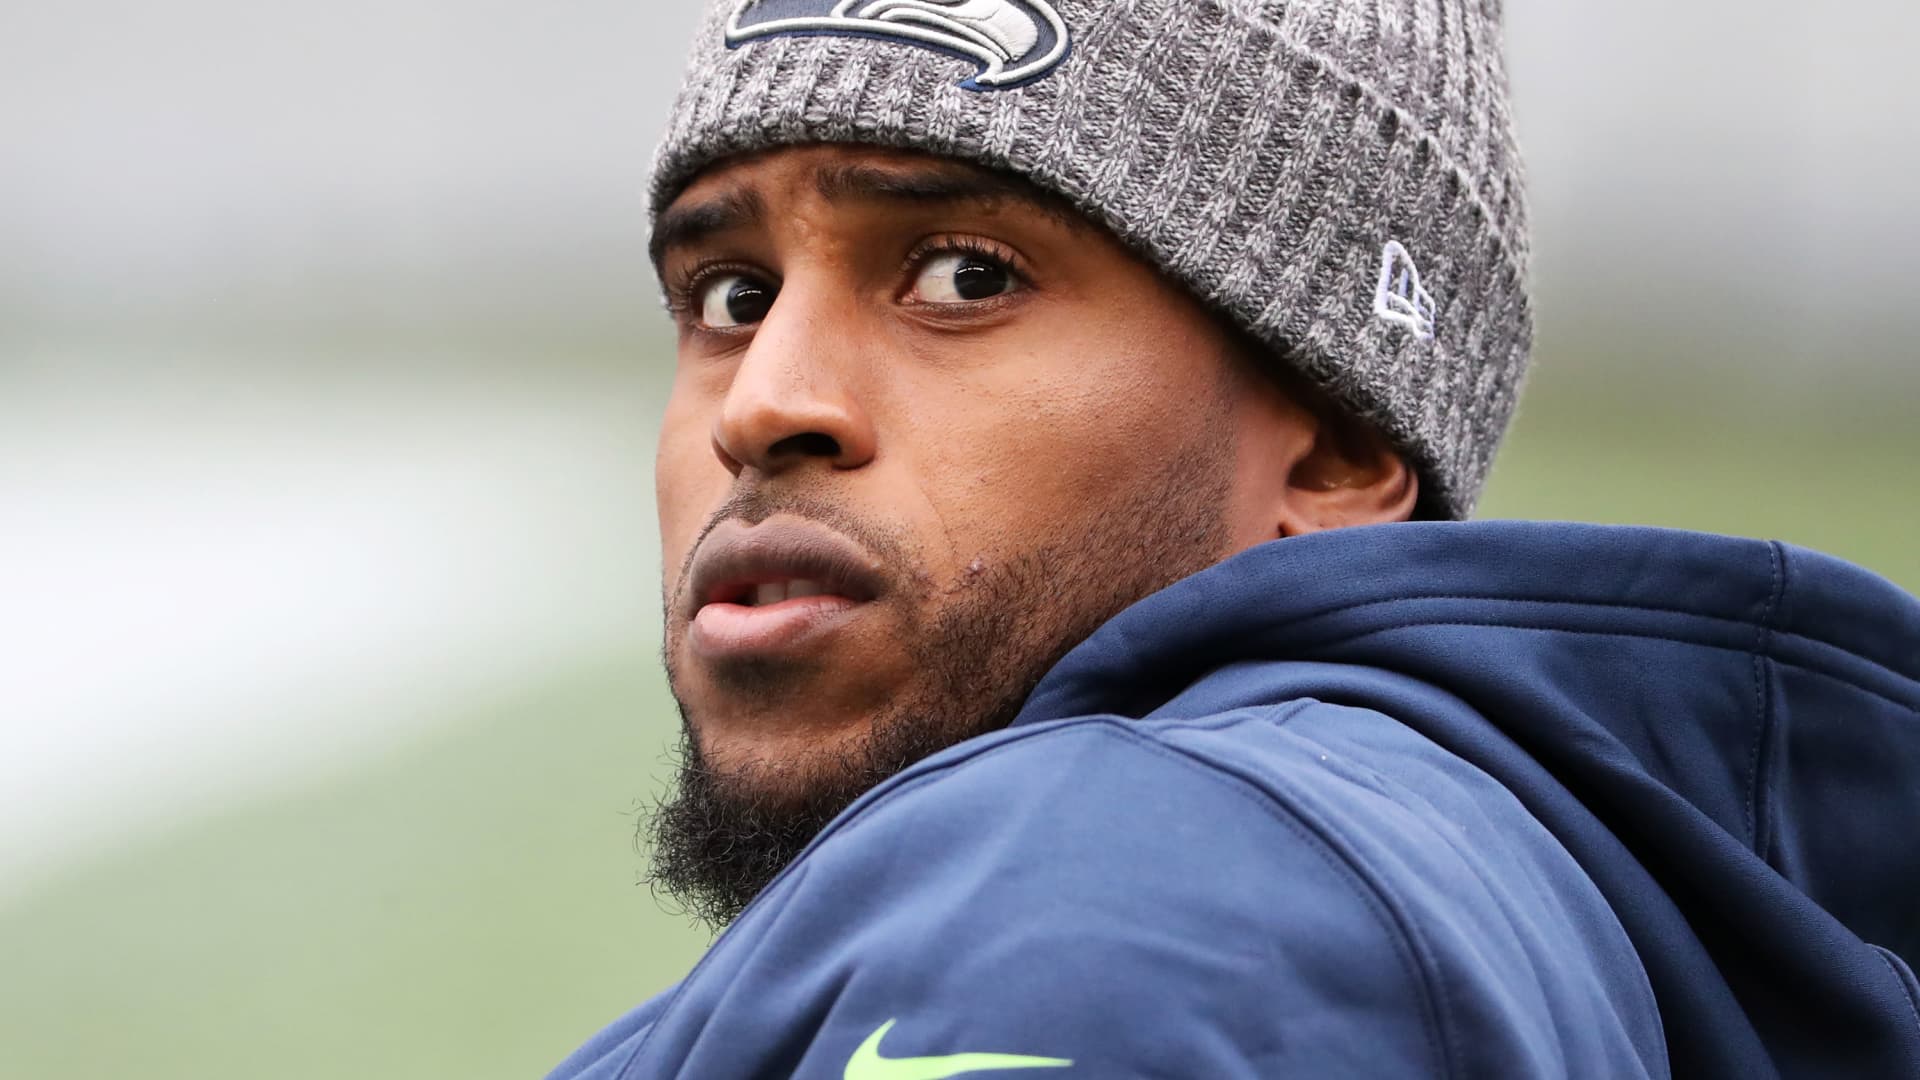 NFL star Bobby Wagner joining former Microsoft, Amazon execs in Seattle-based tech fund